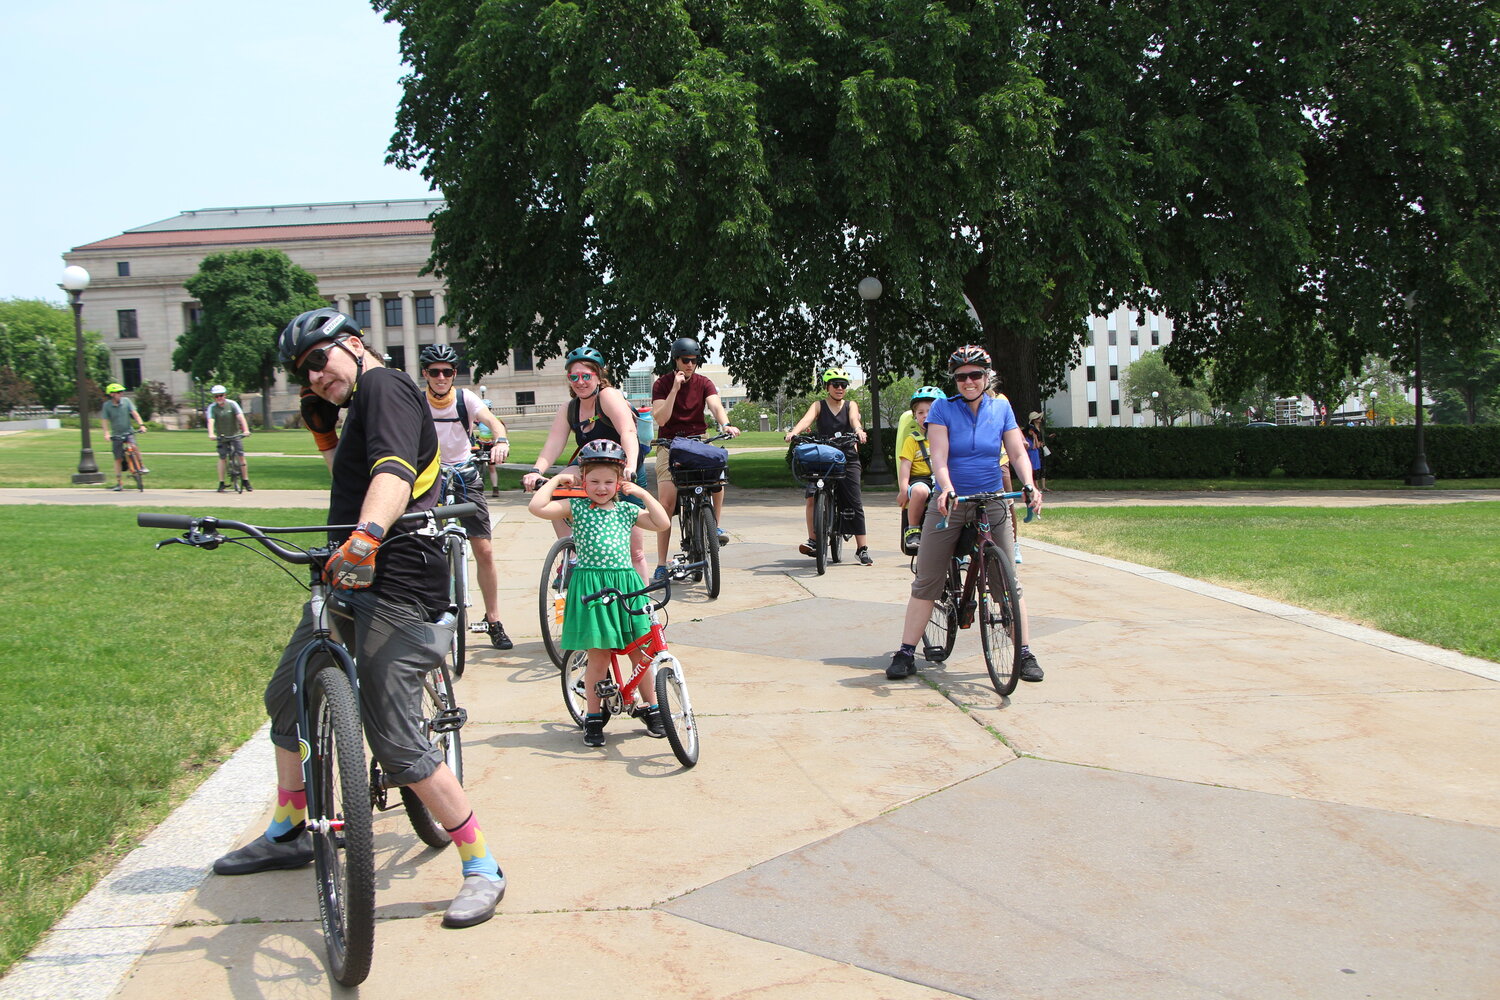 On Saturday, June 17 the Joyful Riders Club gathered at the Minnesota State Capitol before leaving for the DJ dance party ride at the Frogtown Fair.